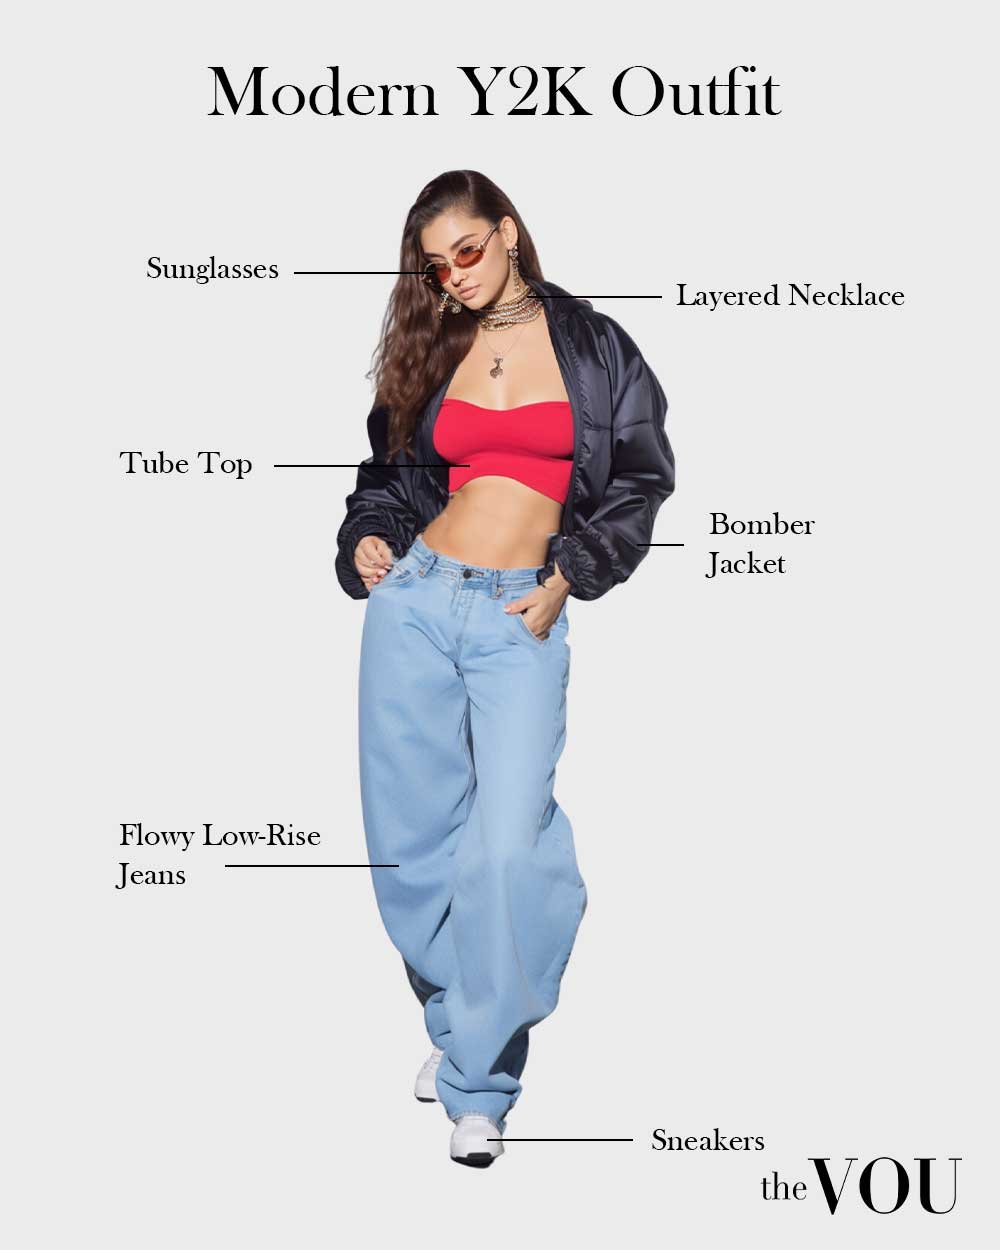 Modern Y2K Style outfit